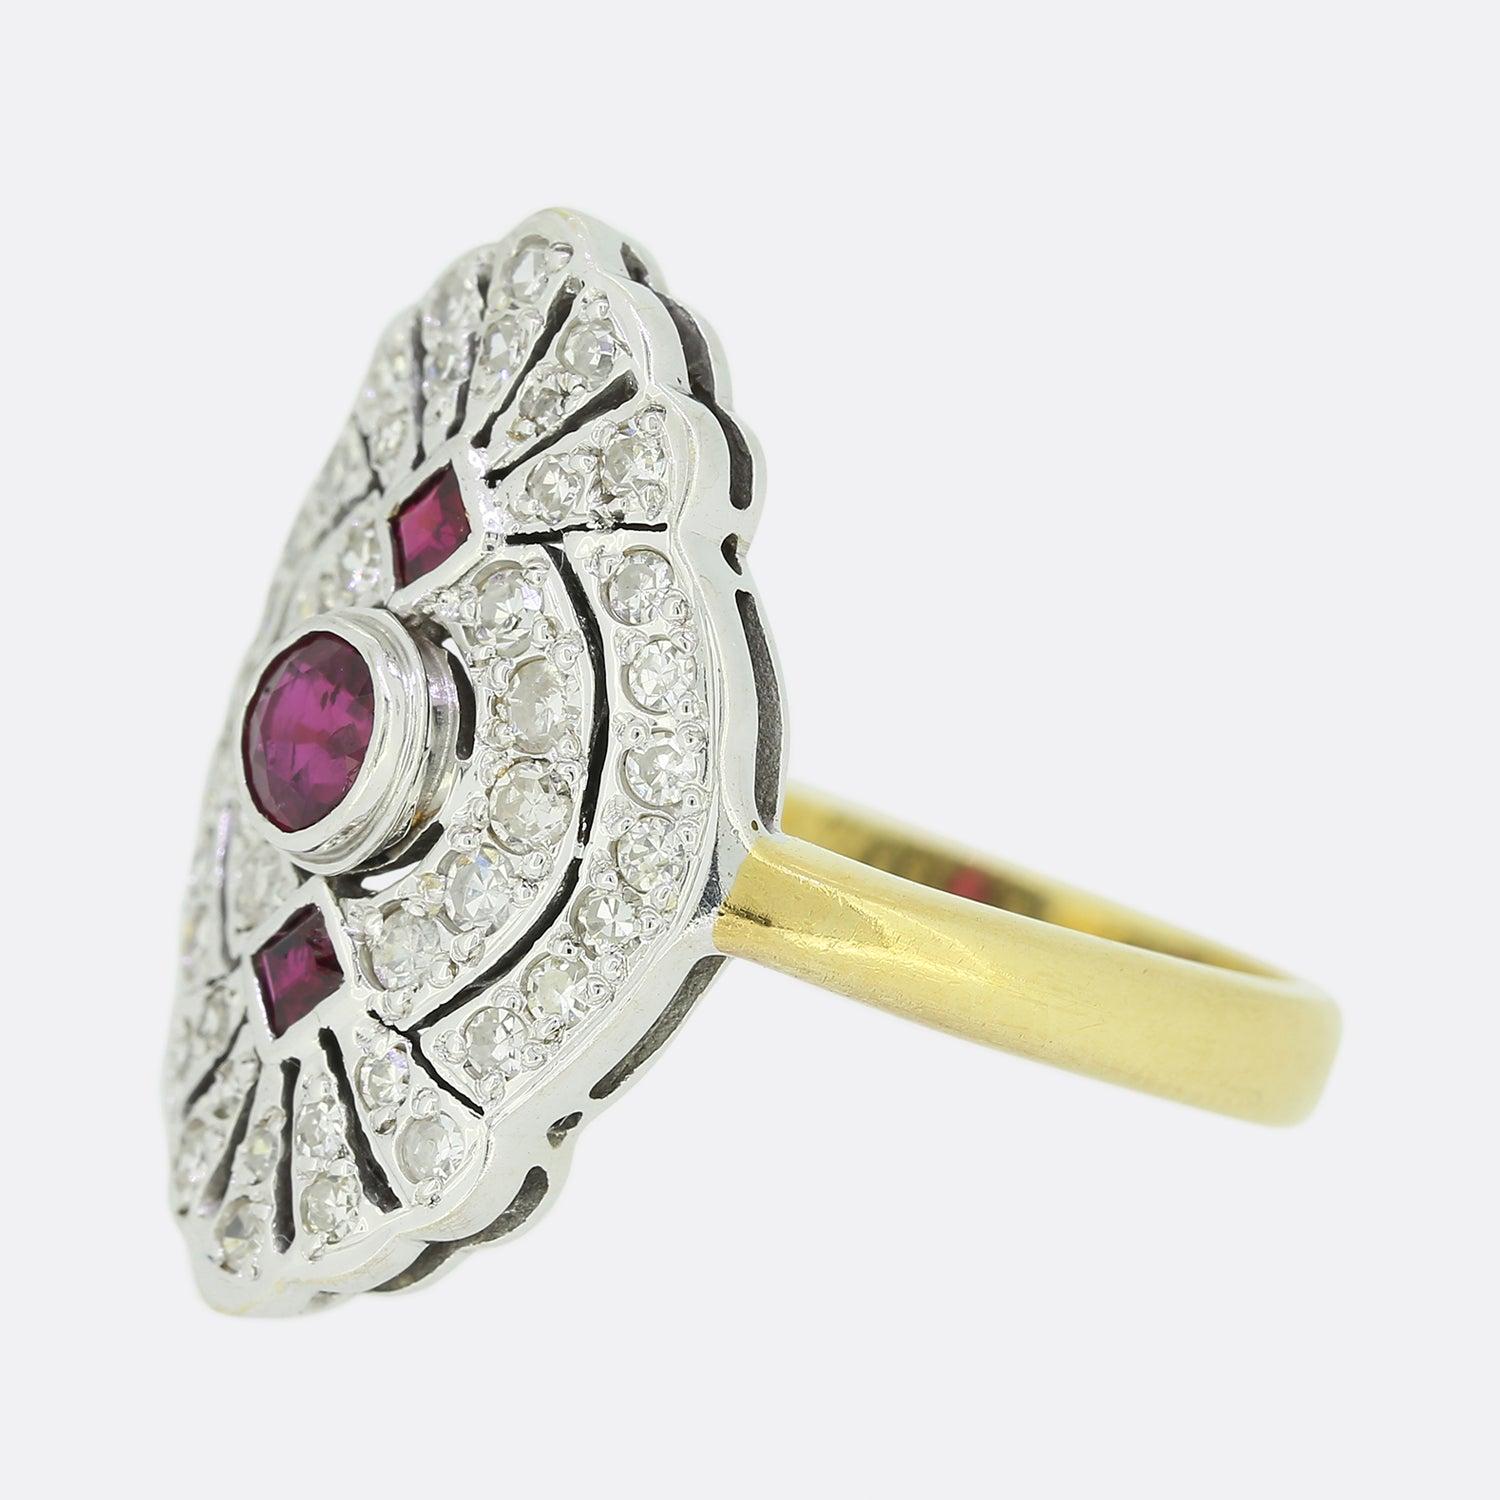 This is an 18ct yellow gold Art Deco style ruby and diamond tablet ring. The focal point of the ring is the single, slightly risen rub-over set ruby at the centre of the piece and the two square shaped rubies; one atop and one below. The ornate,